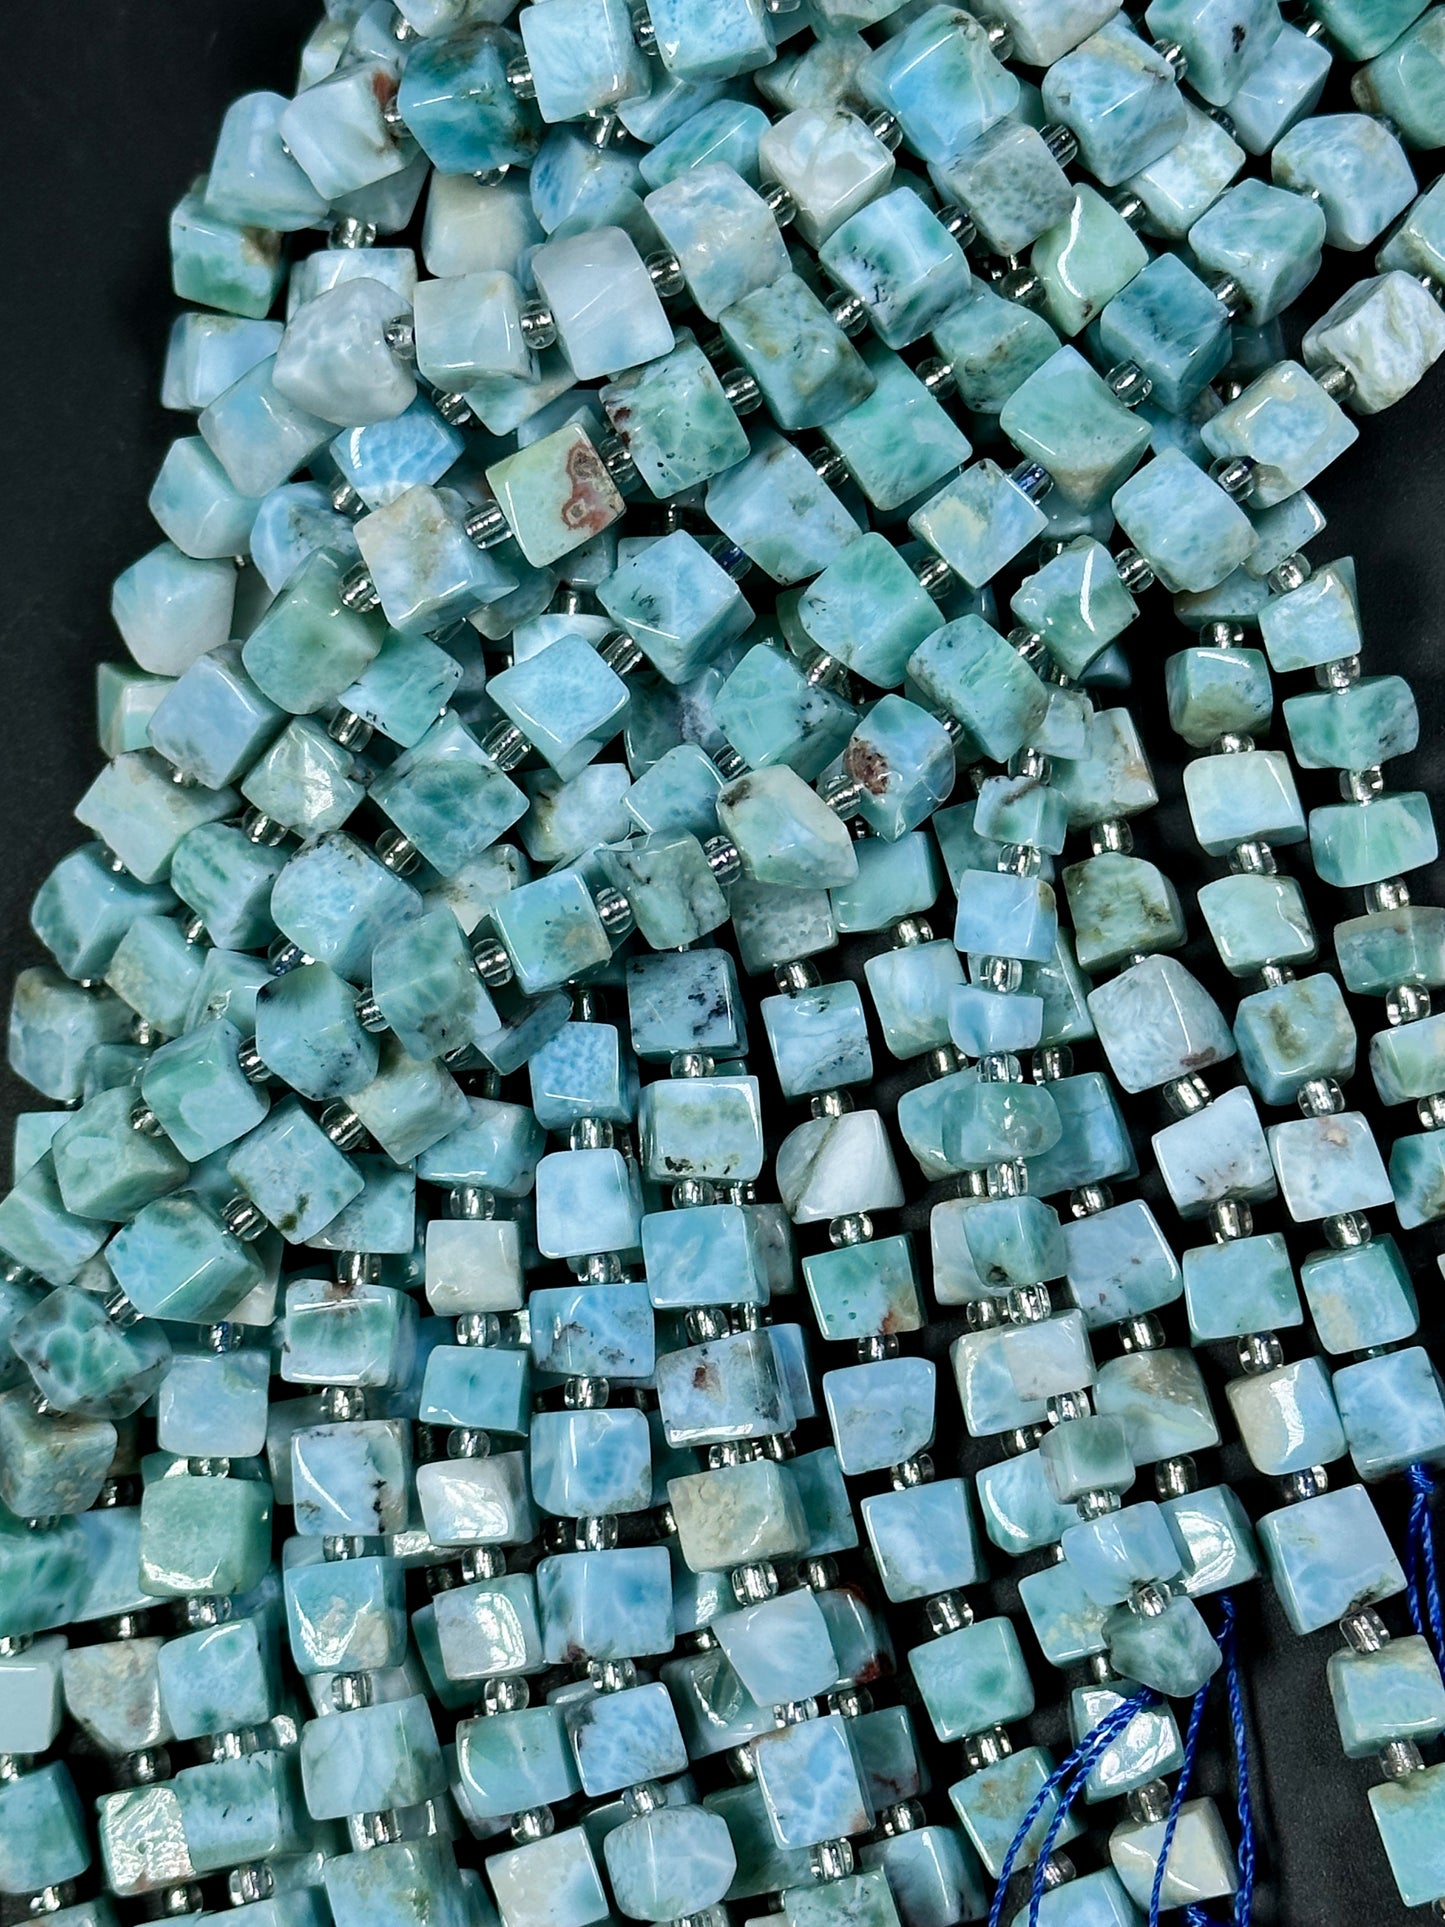 AAA Natural Larimar Gemstone Bead 6mm Cube Shape, Beautiful Natural Blue Color Larimar Gemstone Bead, Excellent High Quality 15.5" Strand